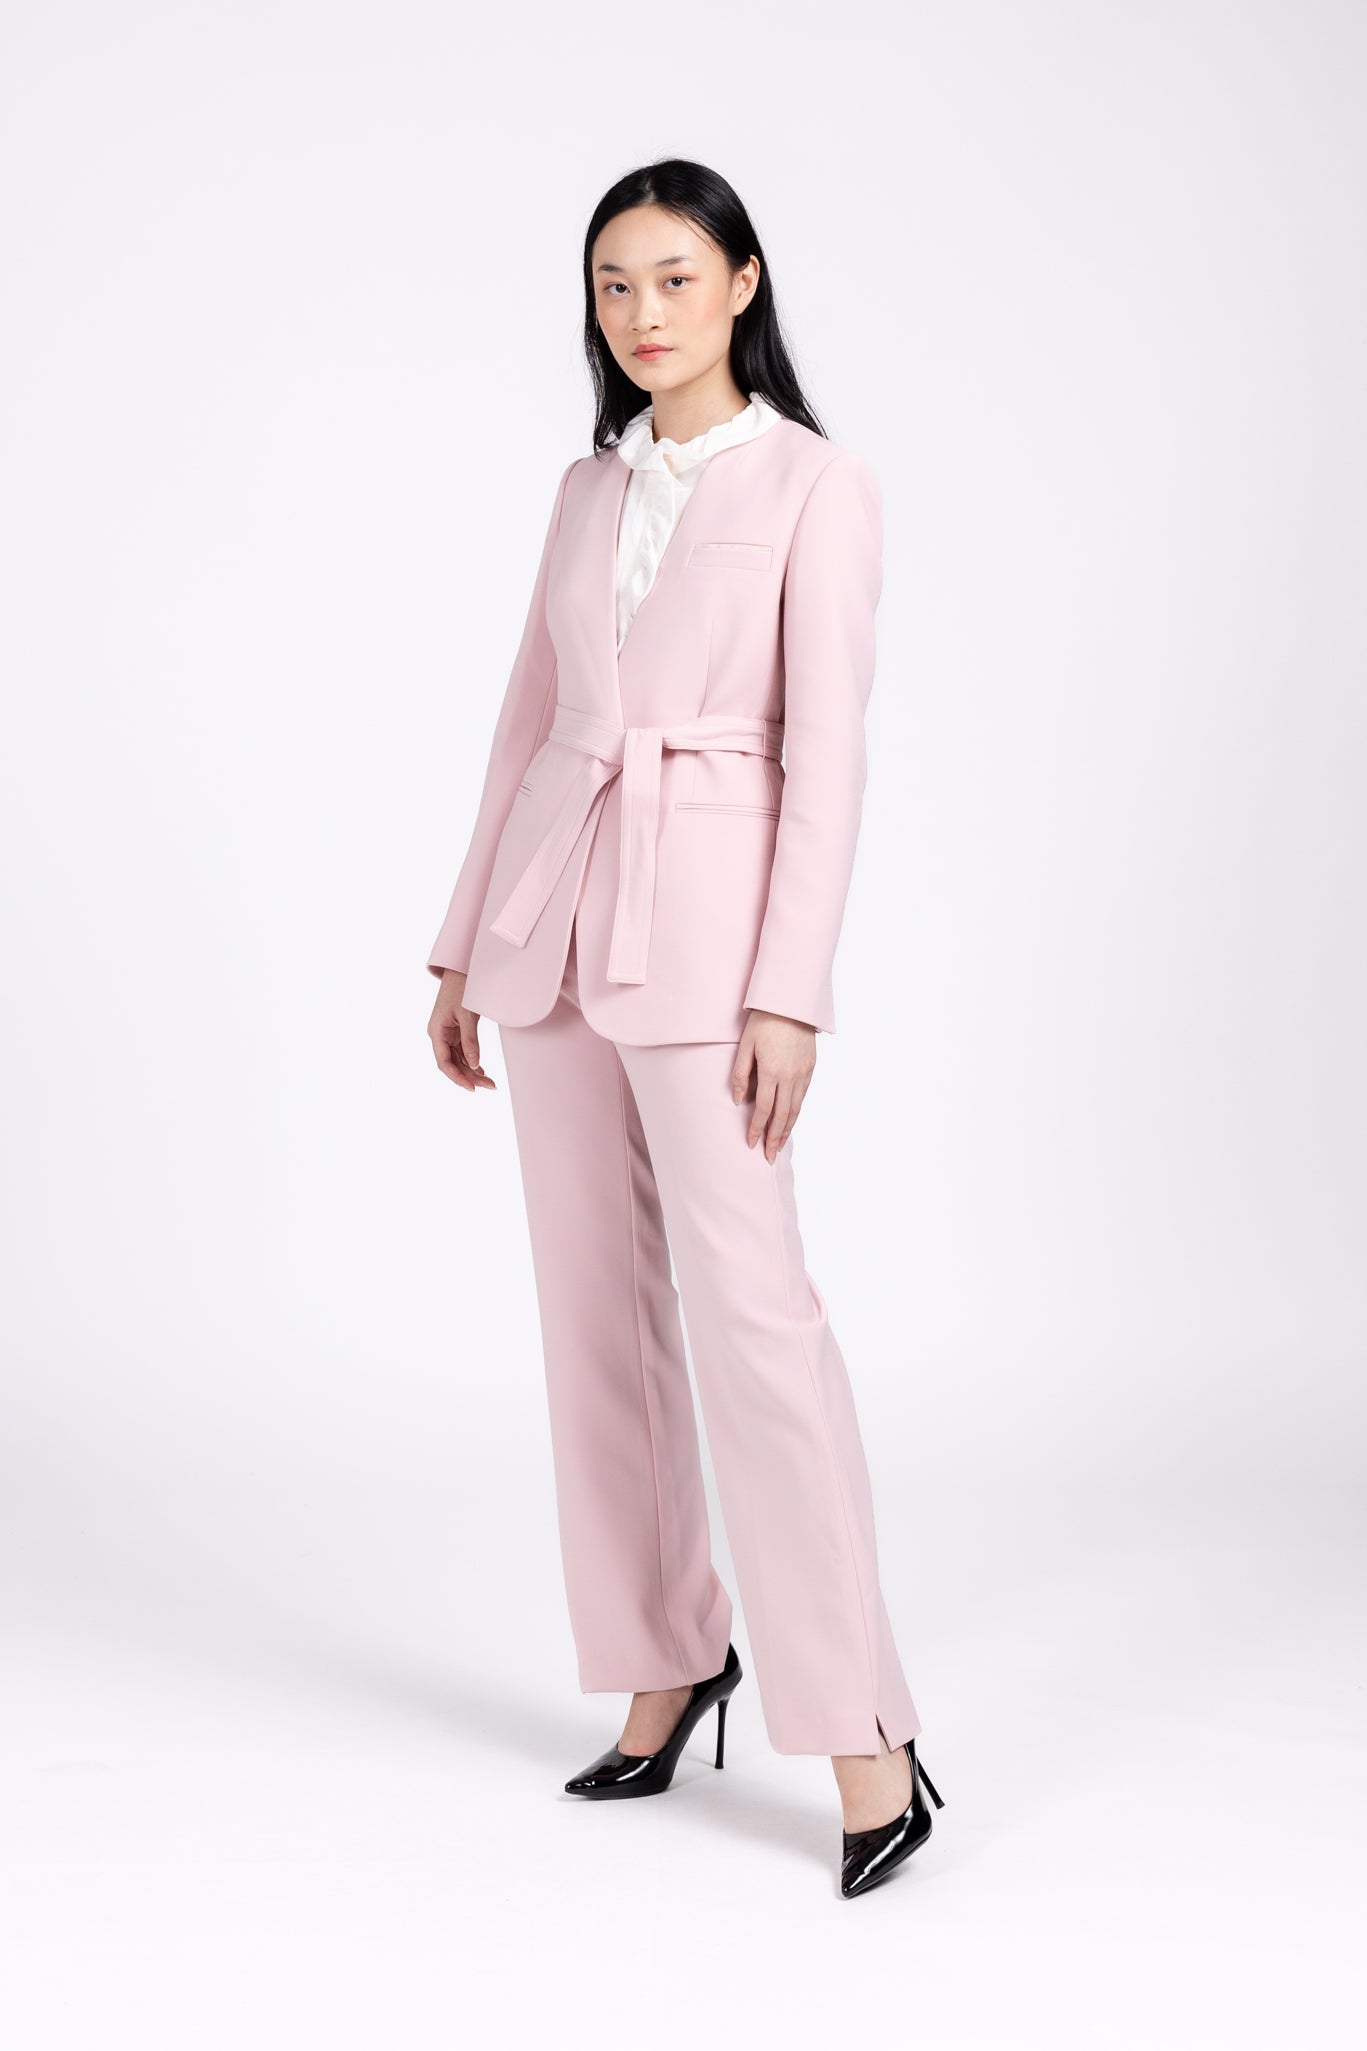 ISLA Tailored Blazer & Pants Two Piece Suit ( Pink)